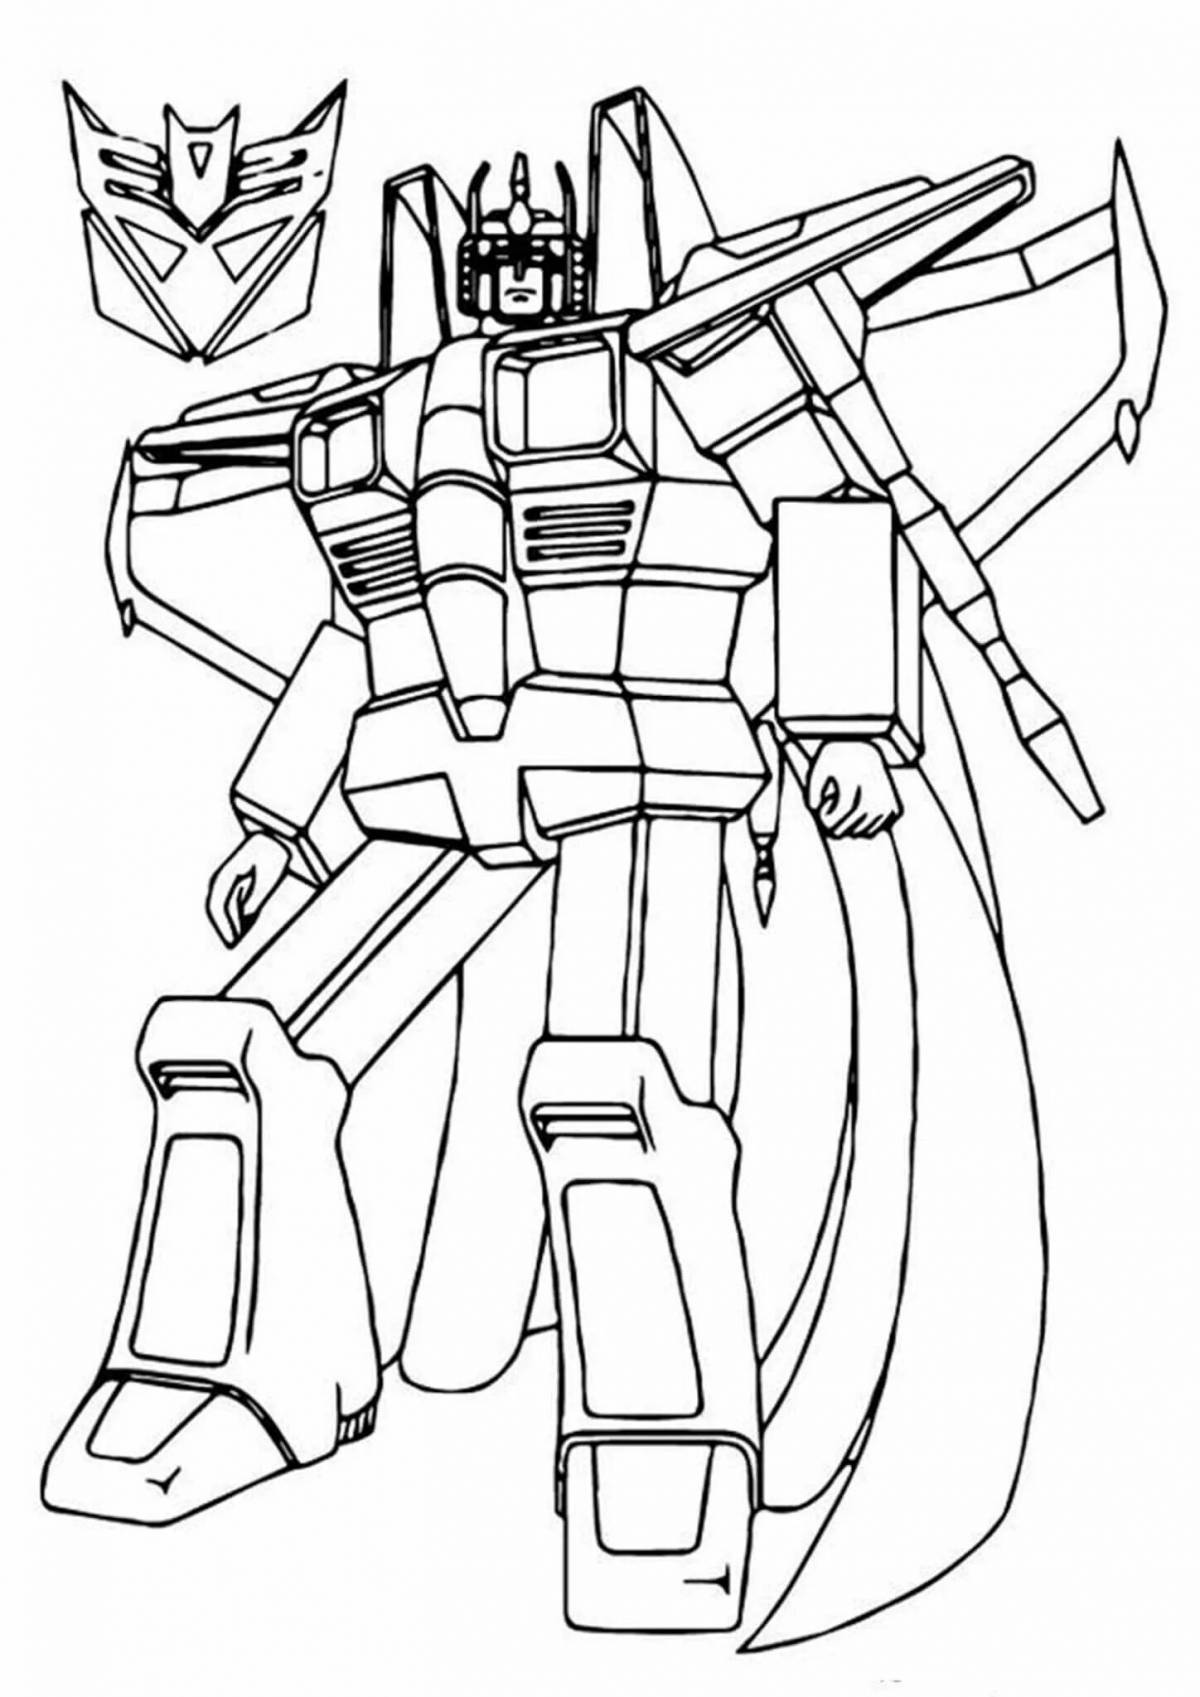 Stimulating robot coloring pages for boys